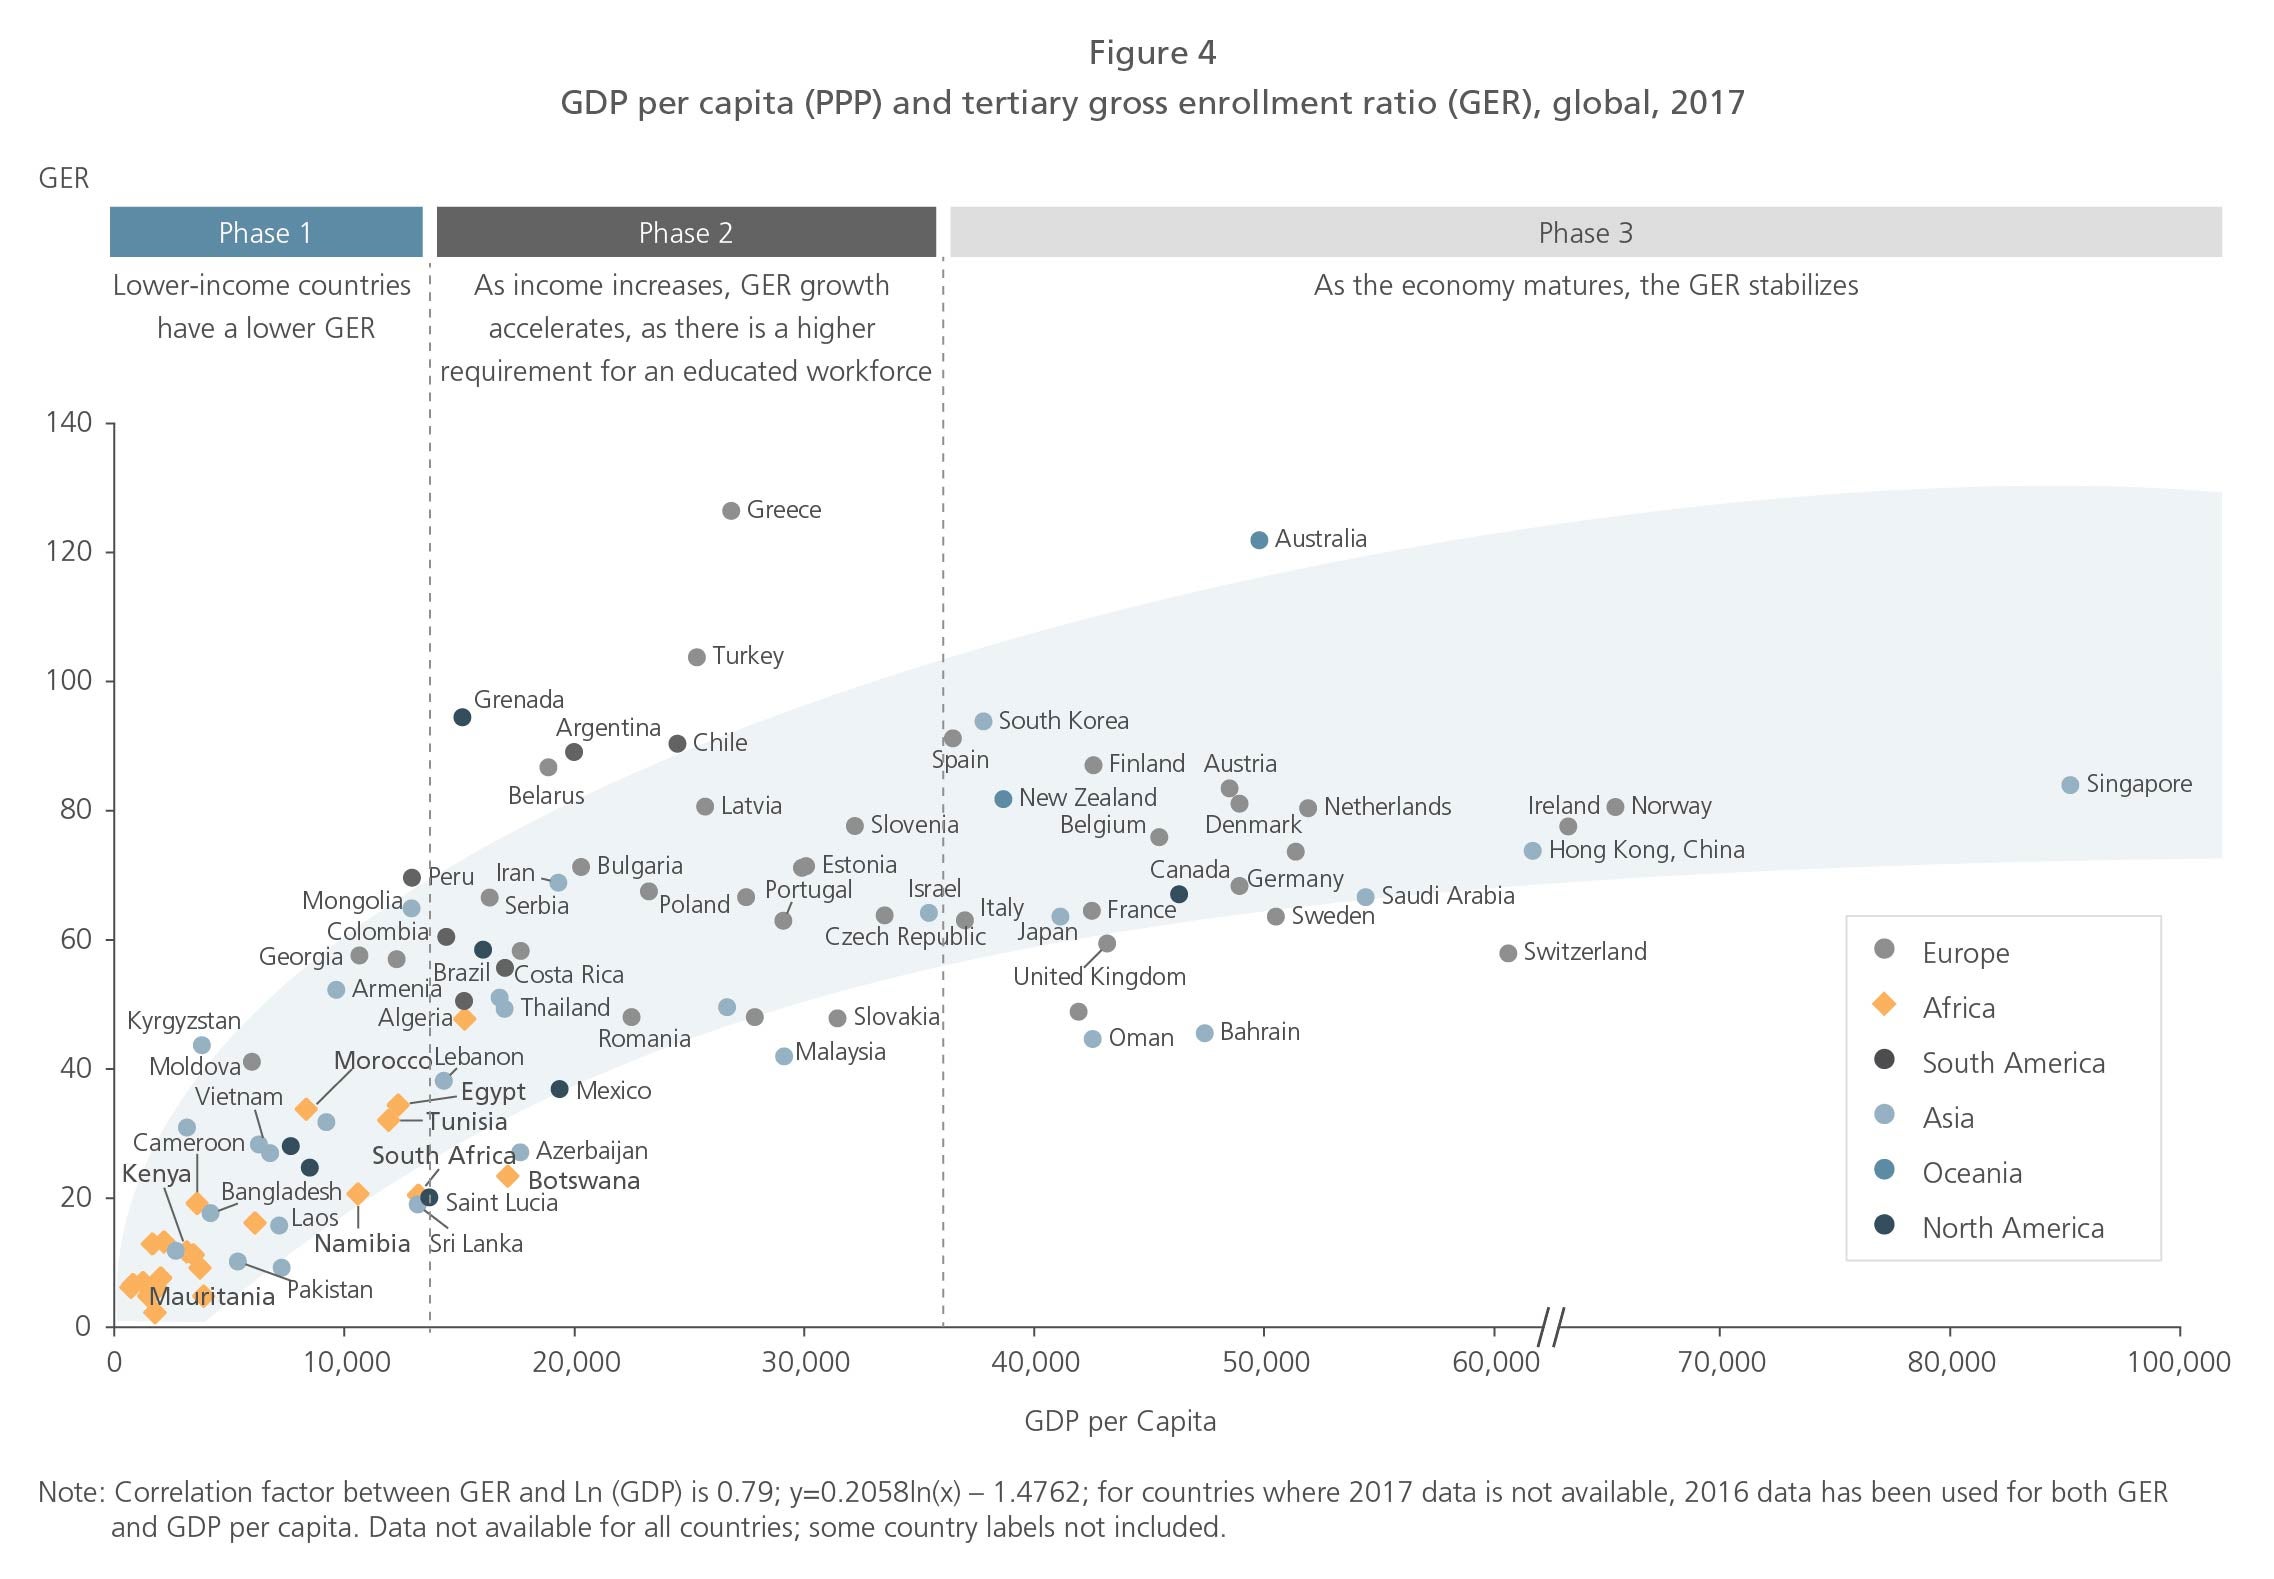 GDP per capita (PPP) and tertiary gross enrollment ratio (GER), global, 2017